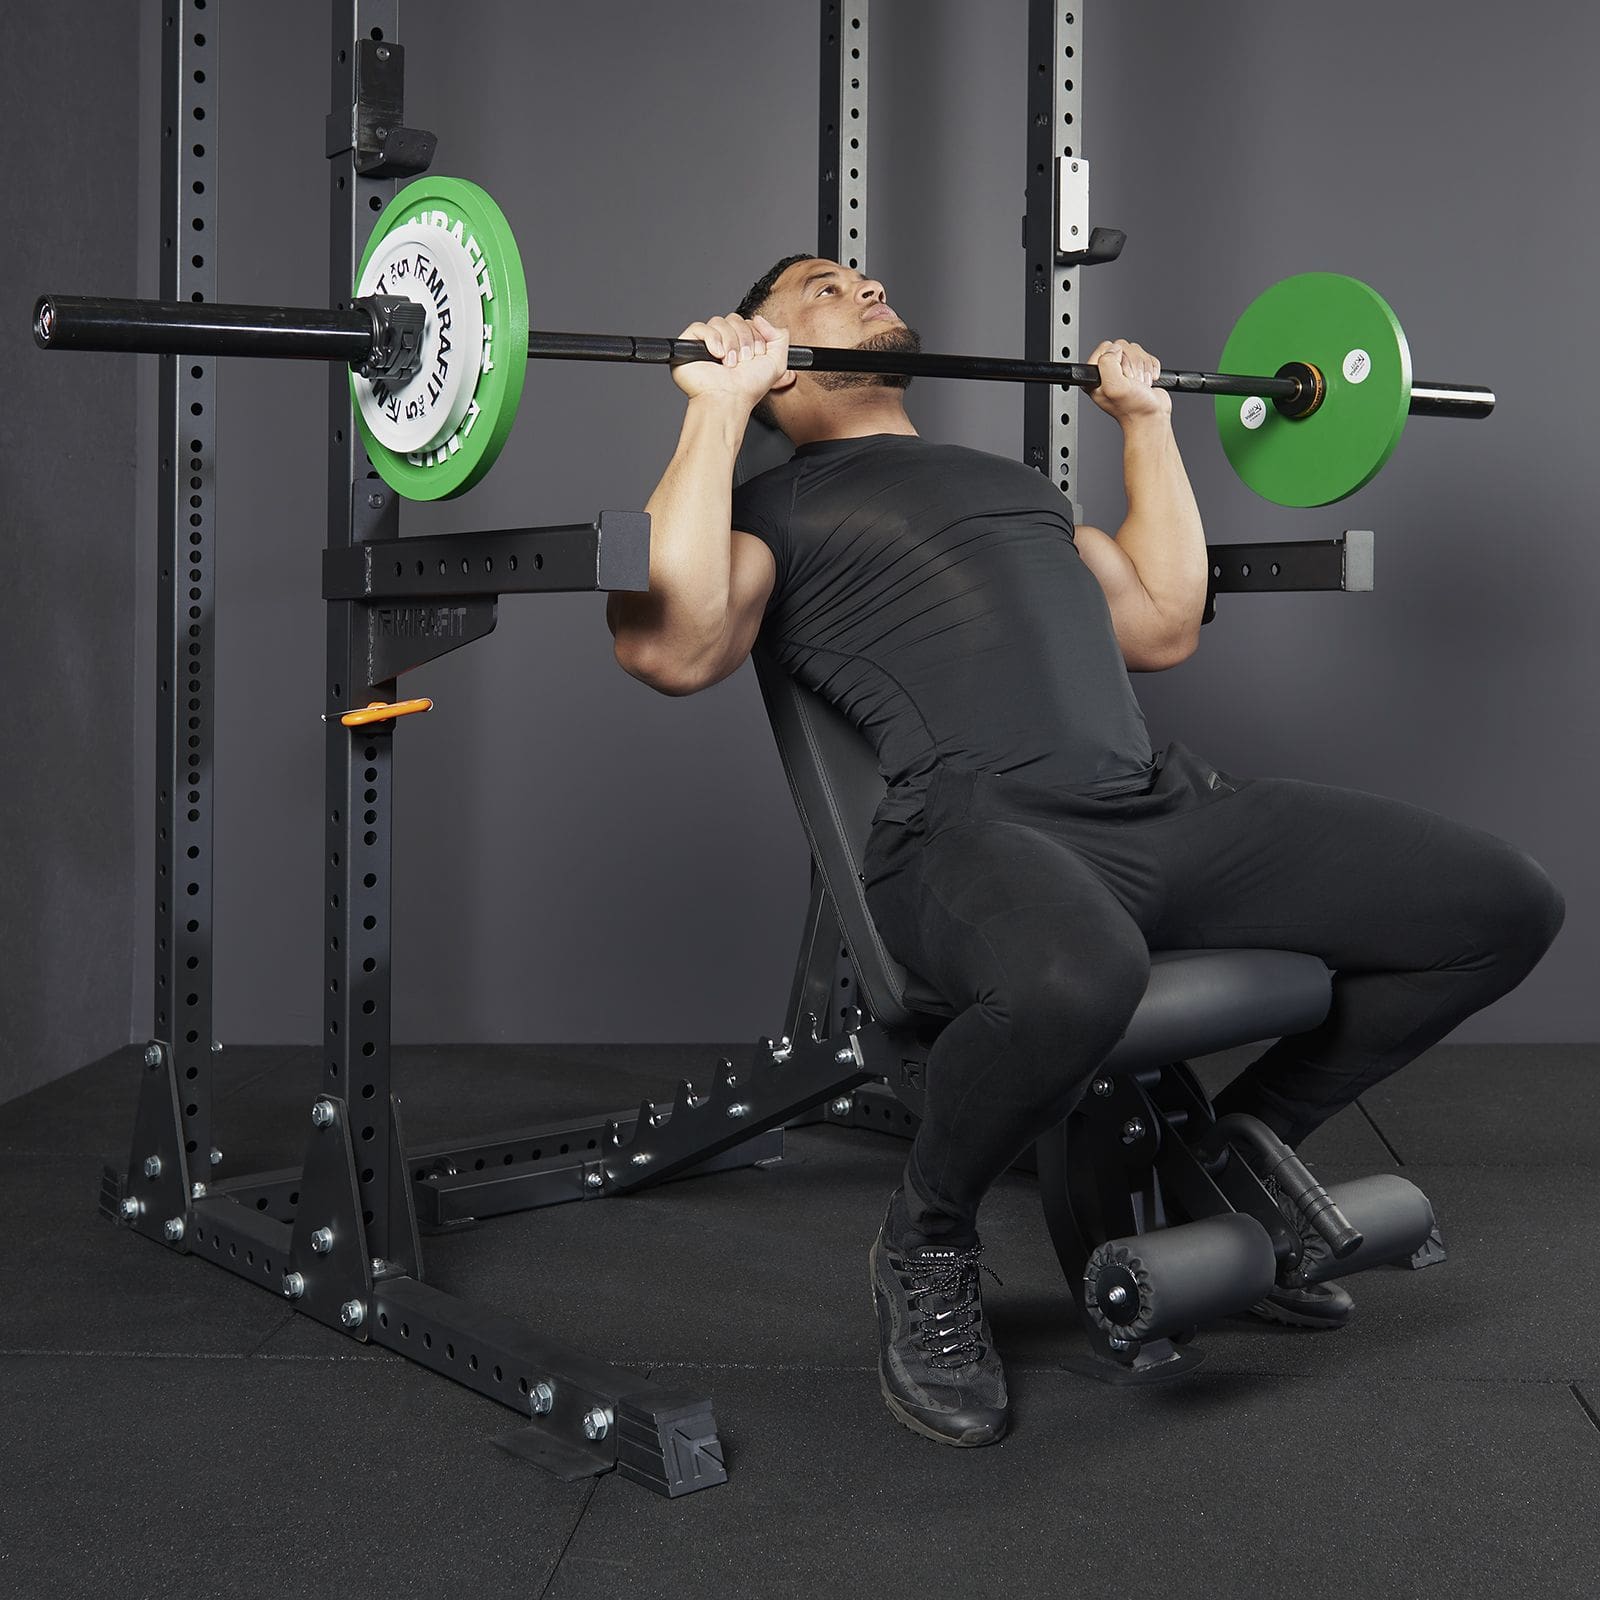 Mirafit Incline Bench - In Use in the UK